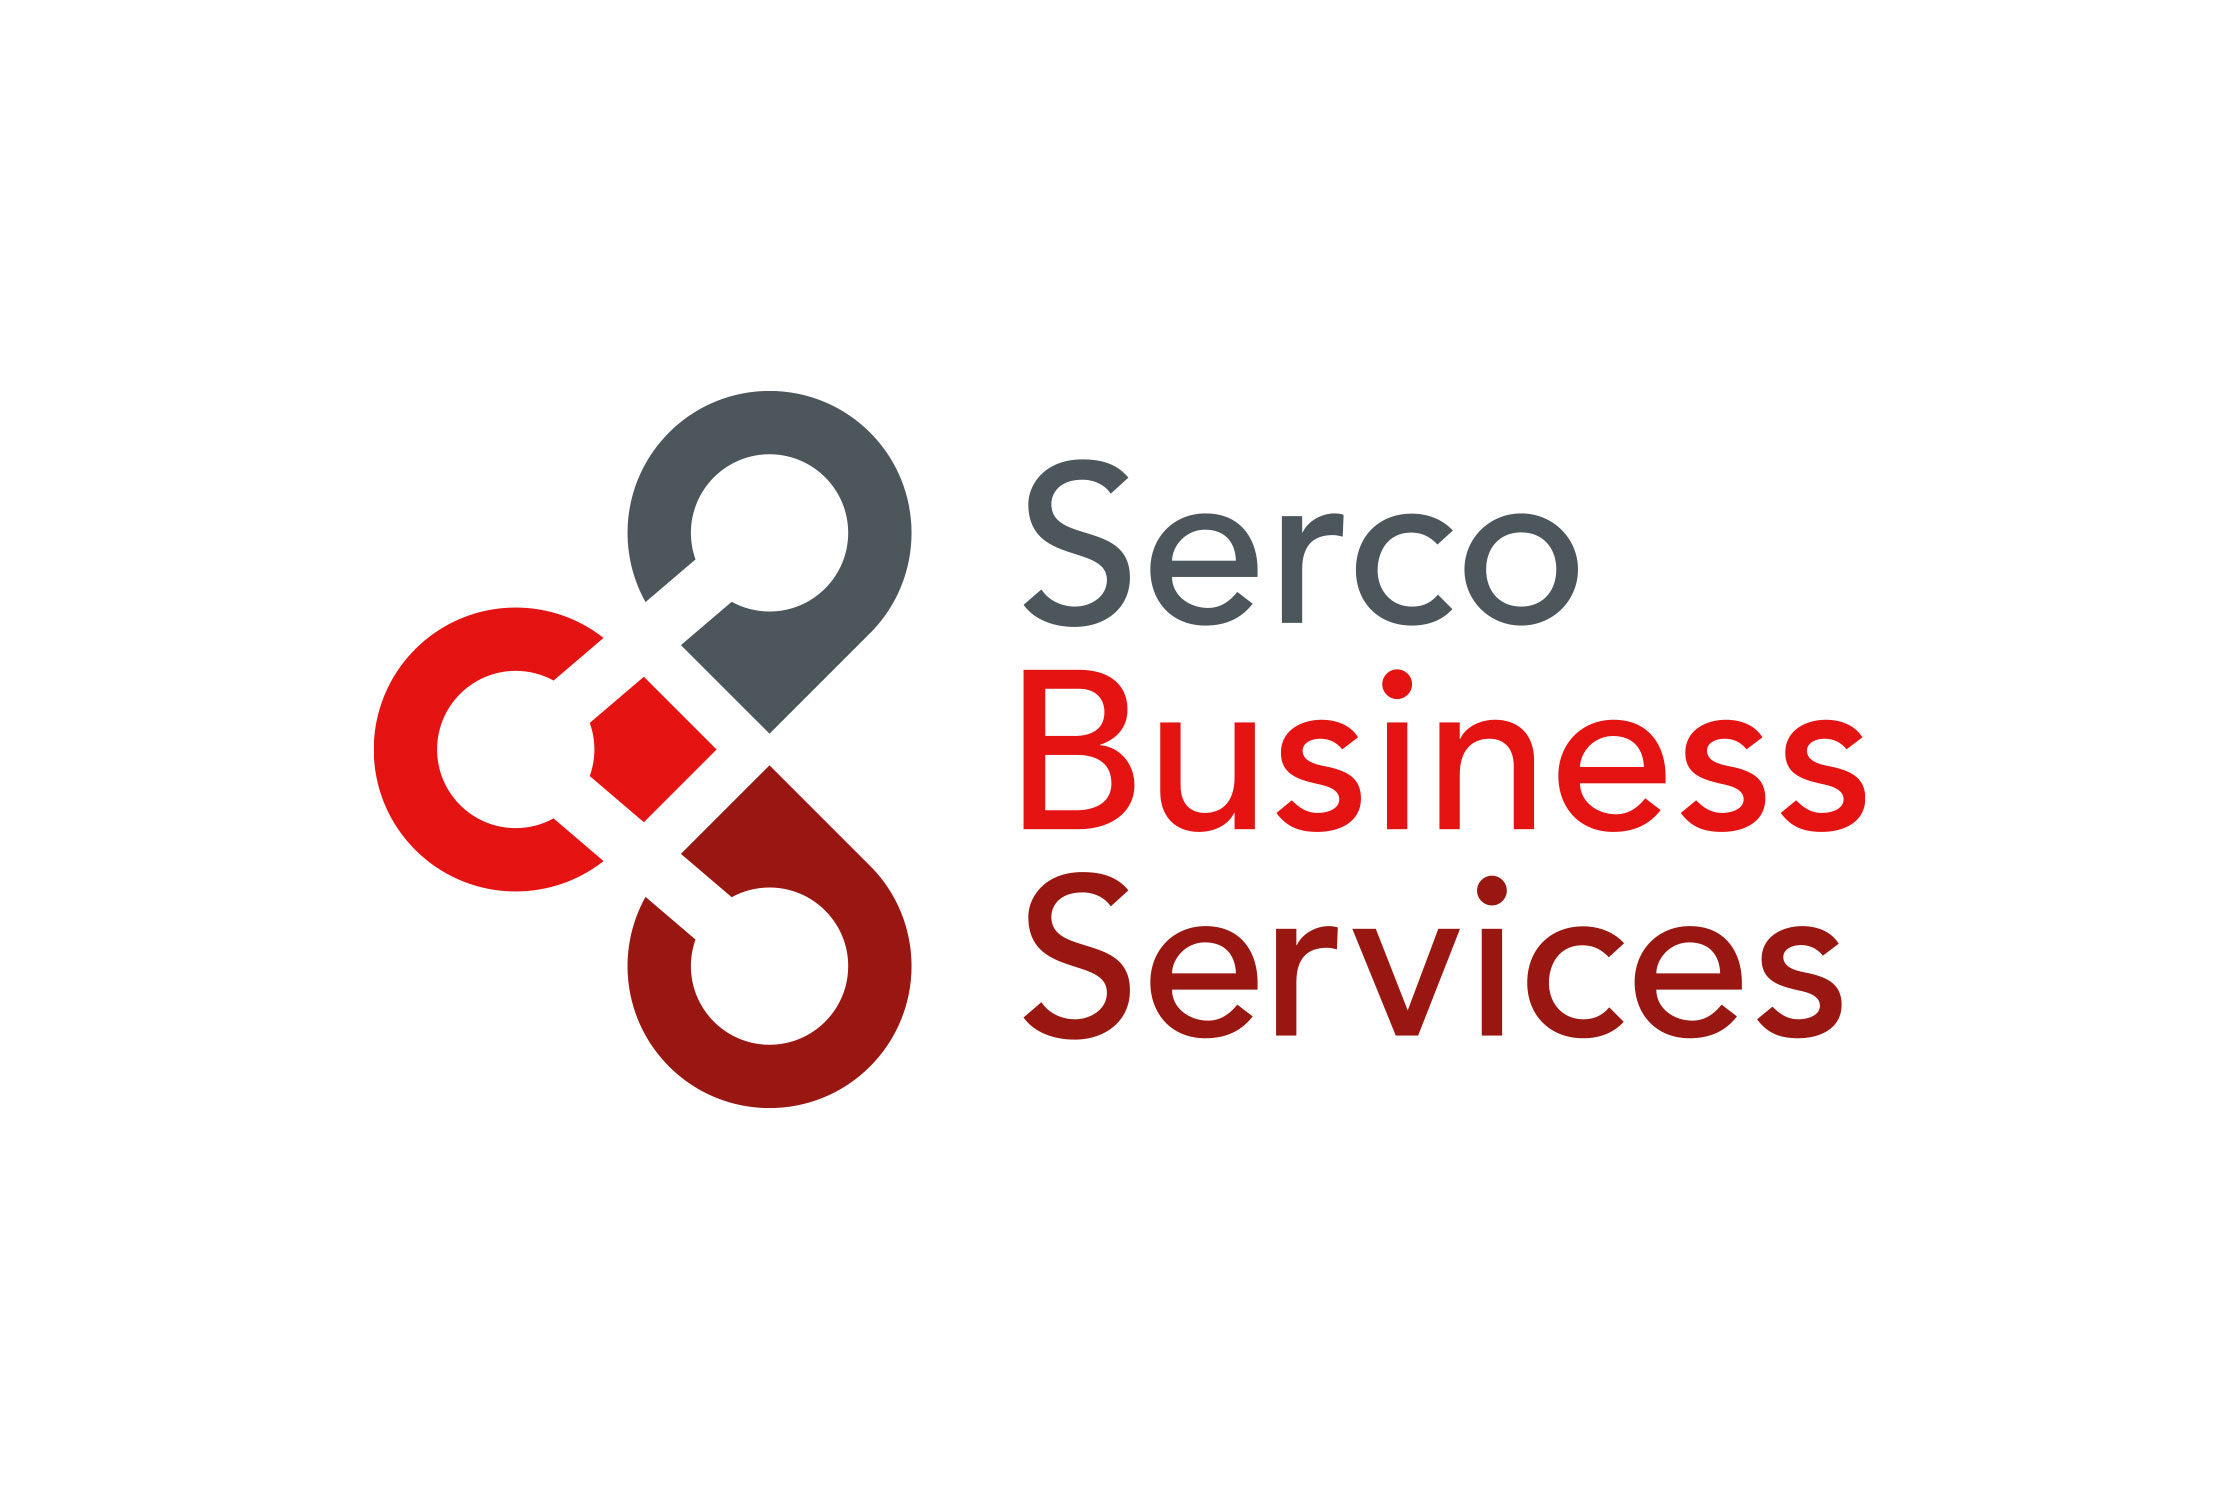 Serco Business Services brand